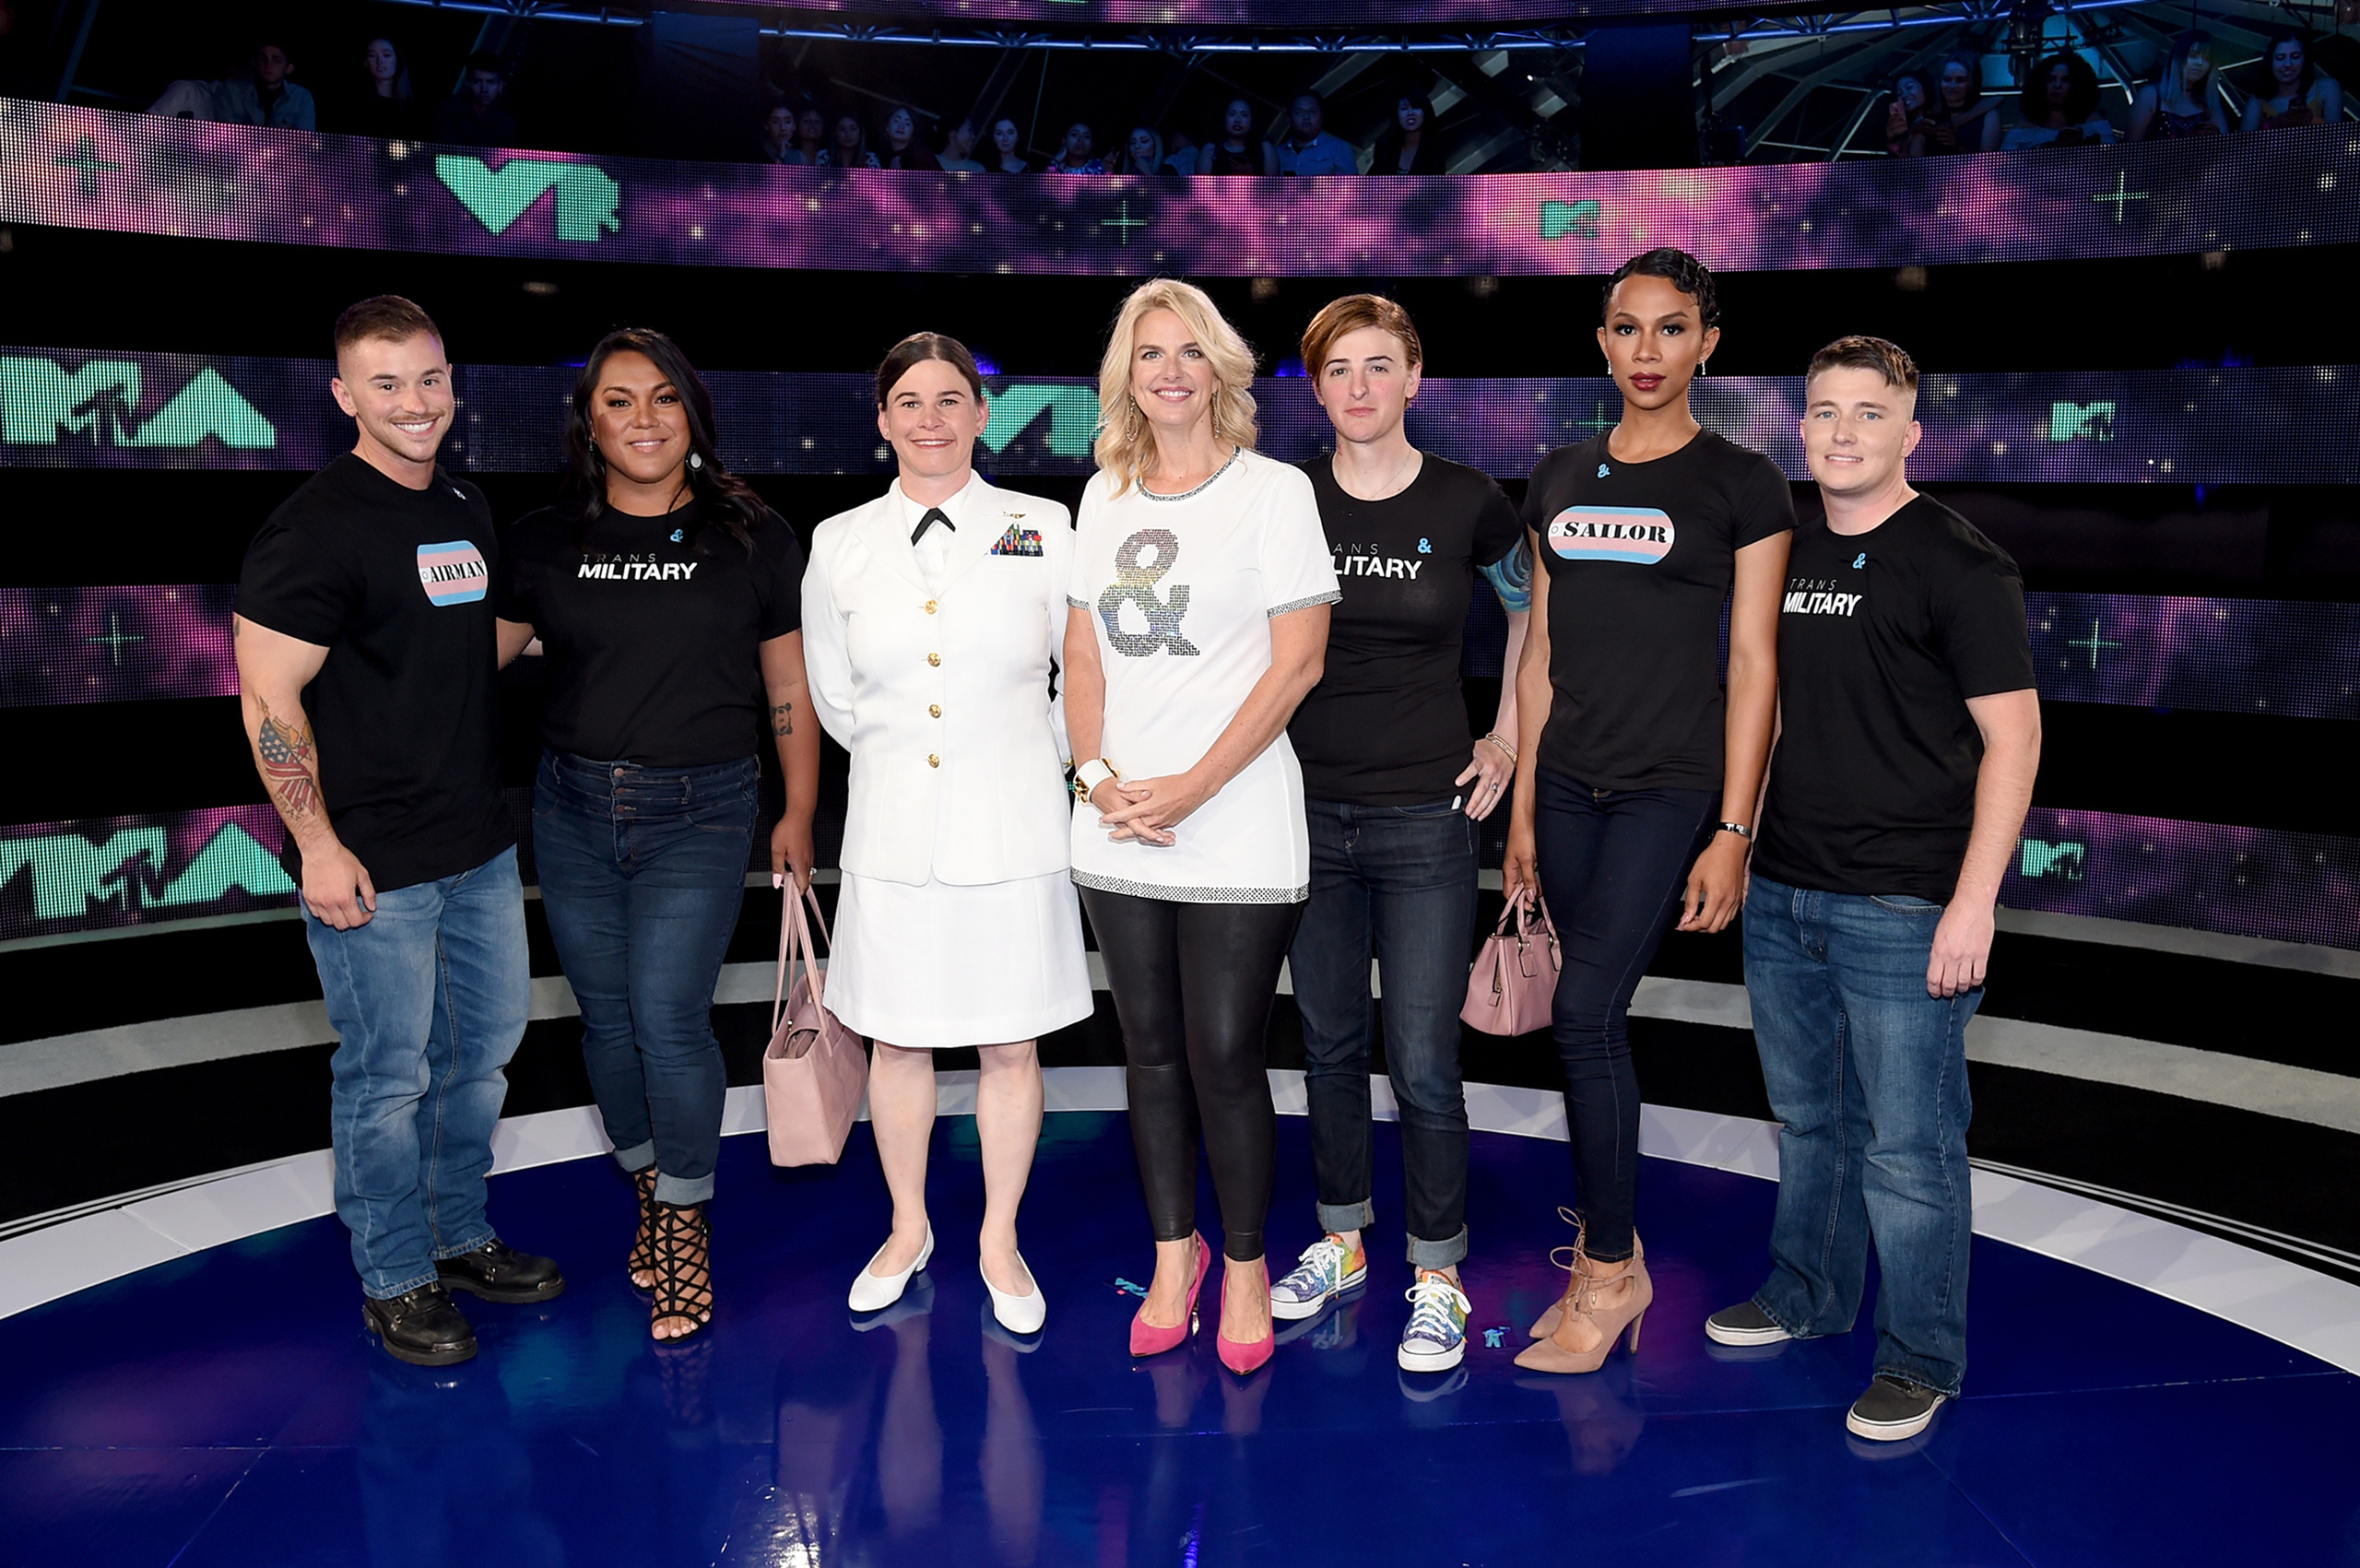 President of GLAAD Sarah Kate Ellis and transgender military members attend the 2017 MTV Video Music Awards at The Forum on Aug. 27, 2017 in Inglewood, Calif. (John Shearer—MTV/Getty Images)